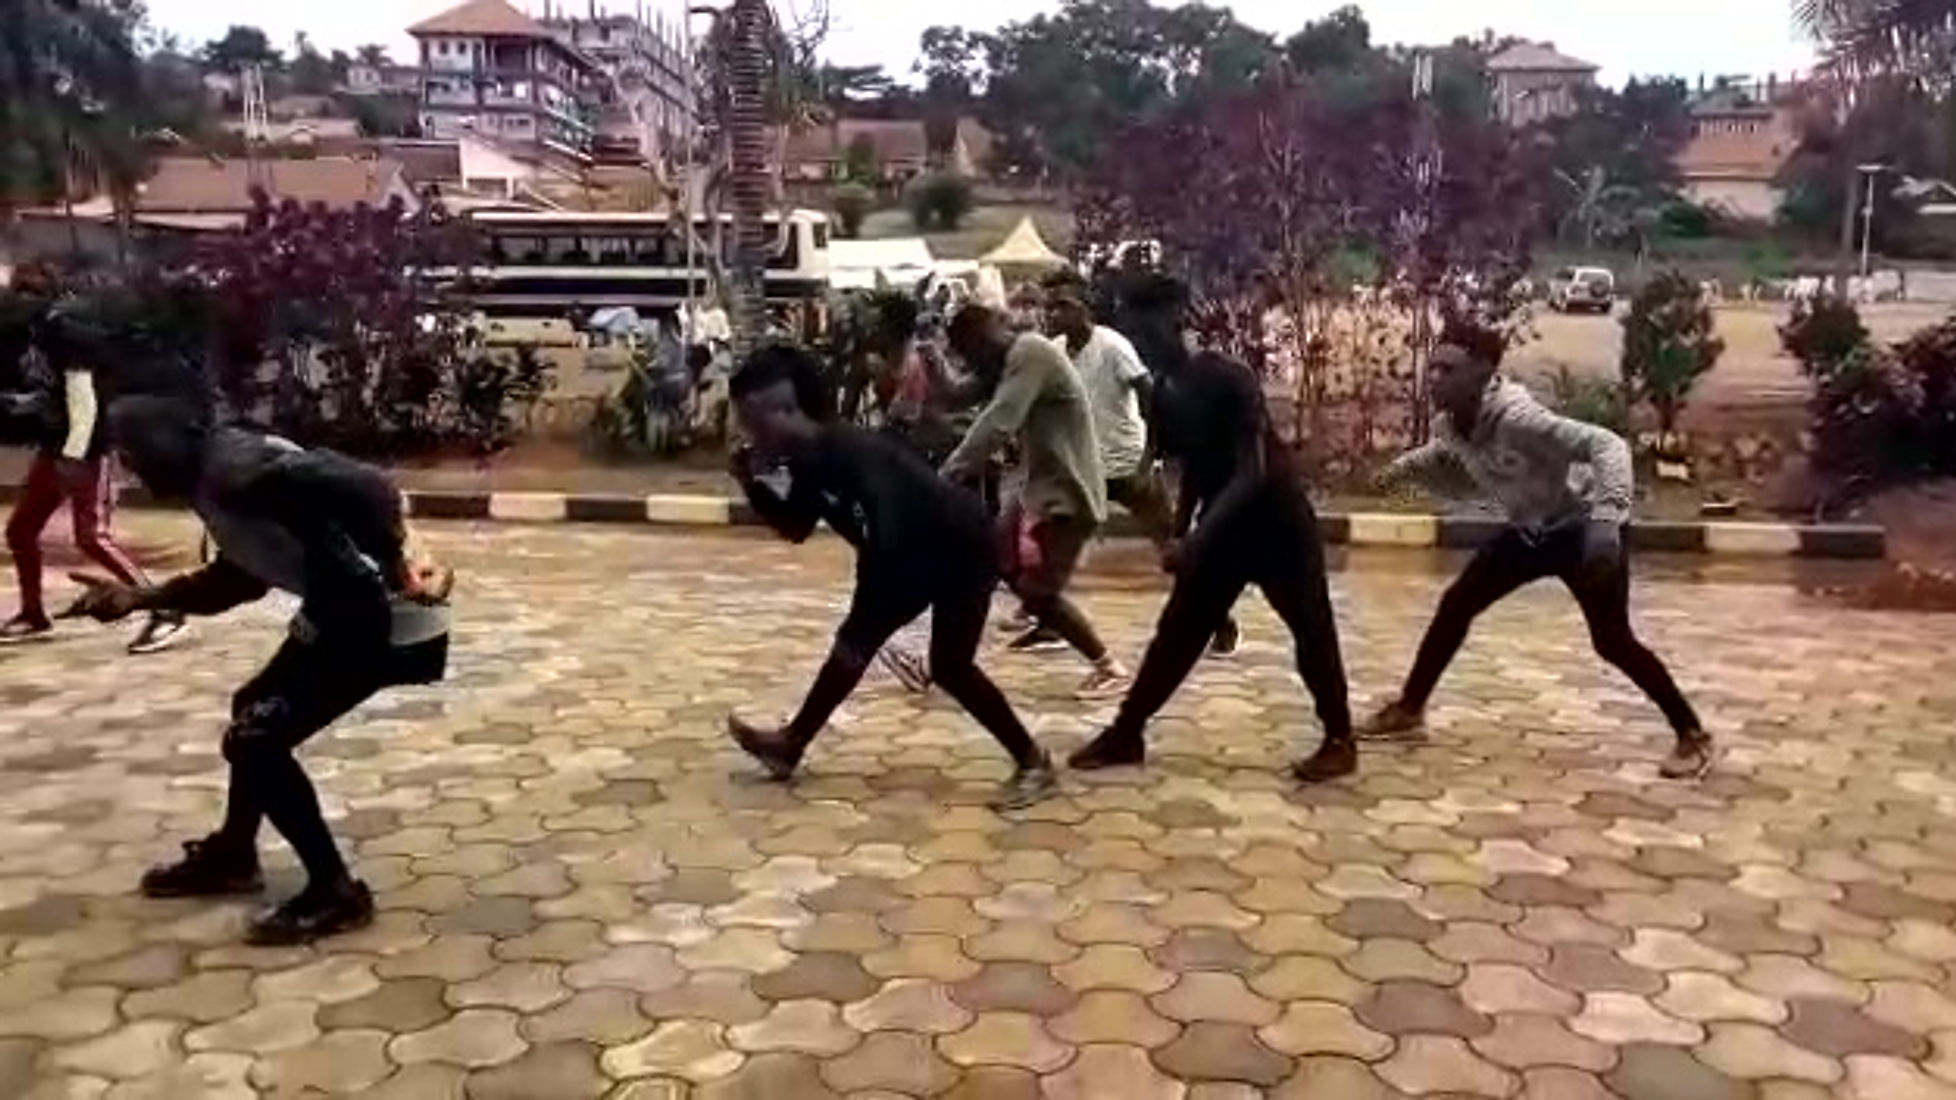 Dance workshop with urban refugees in Kampala